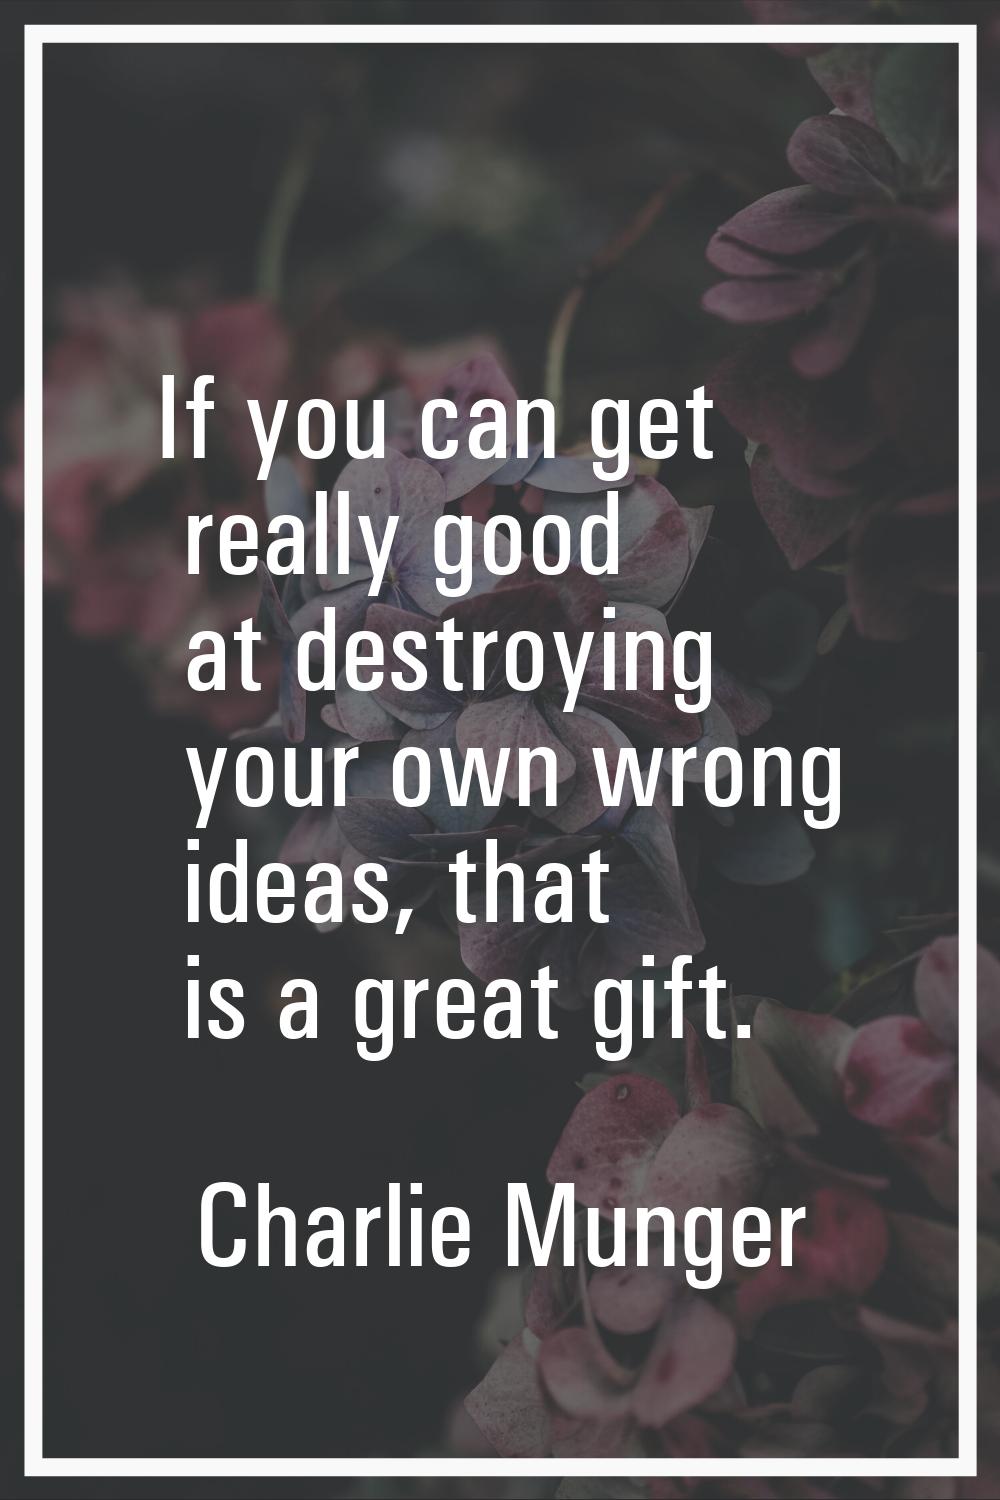 If you can get really good at destroying your own wrong ideas, that is a great gift.